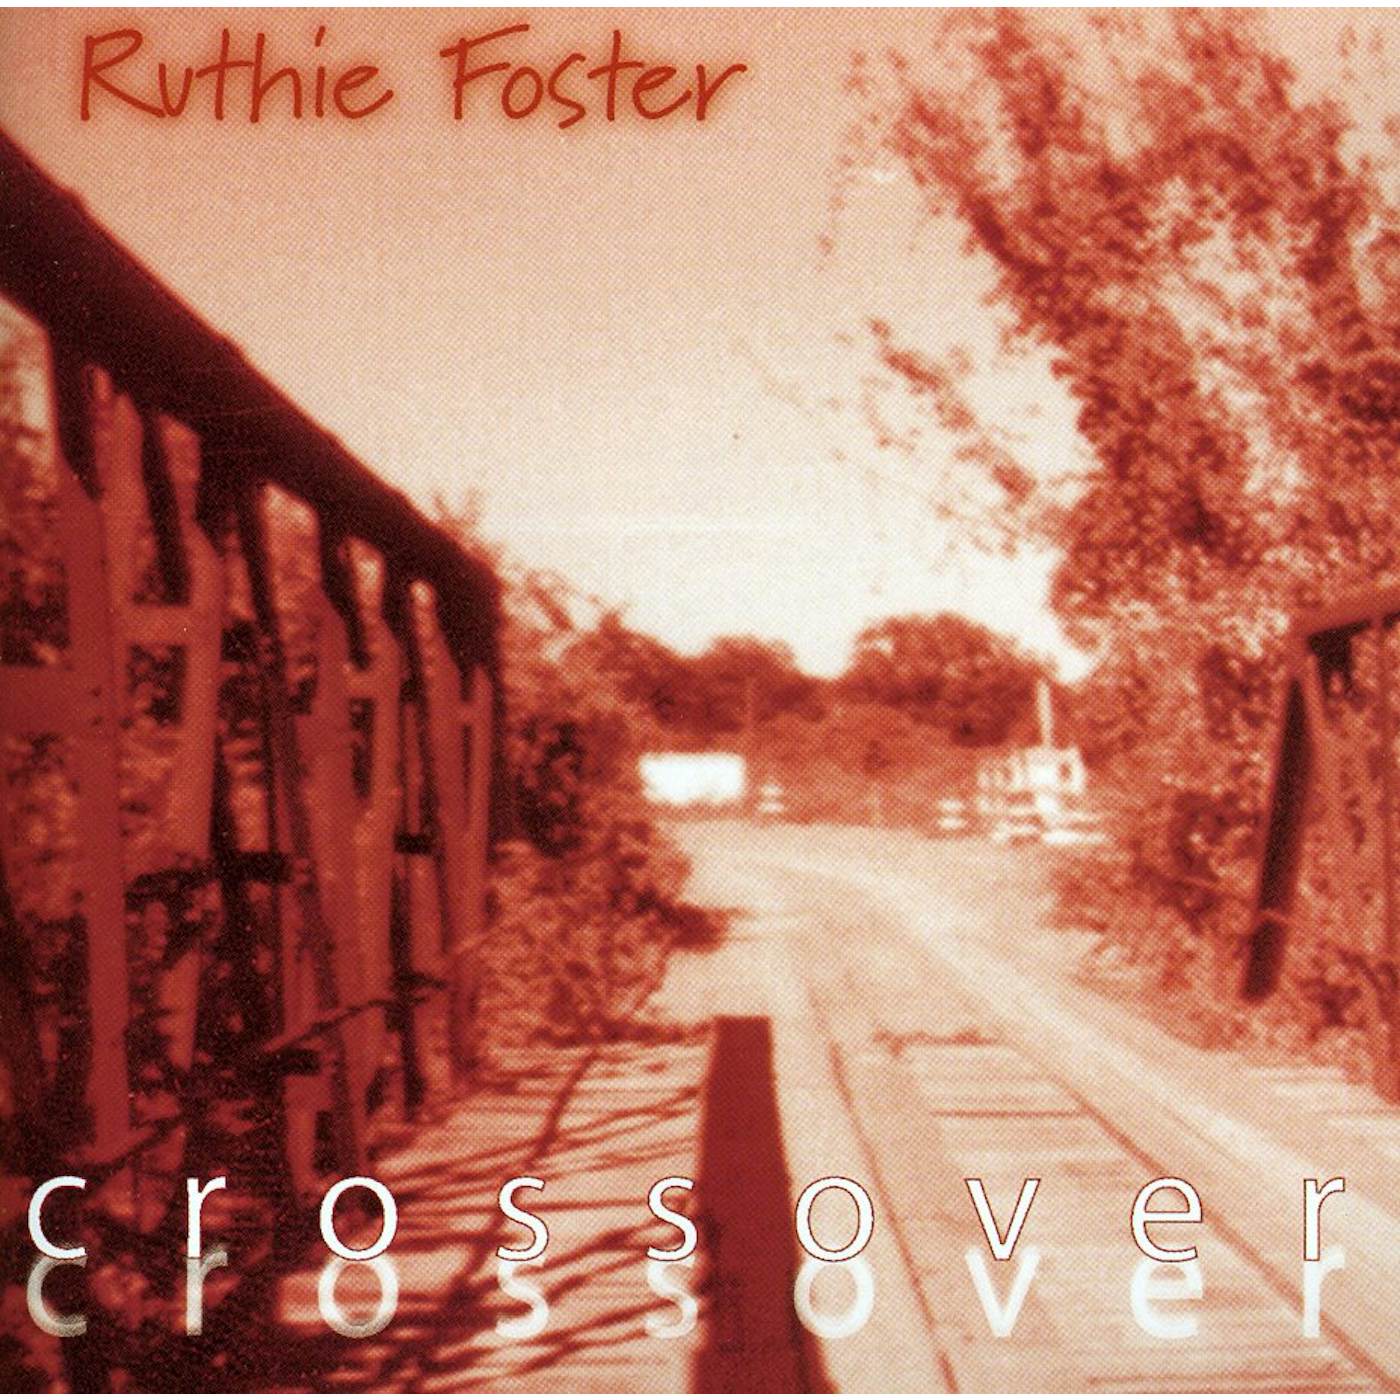 Ruthie Foster CROSSOVER CD